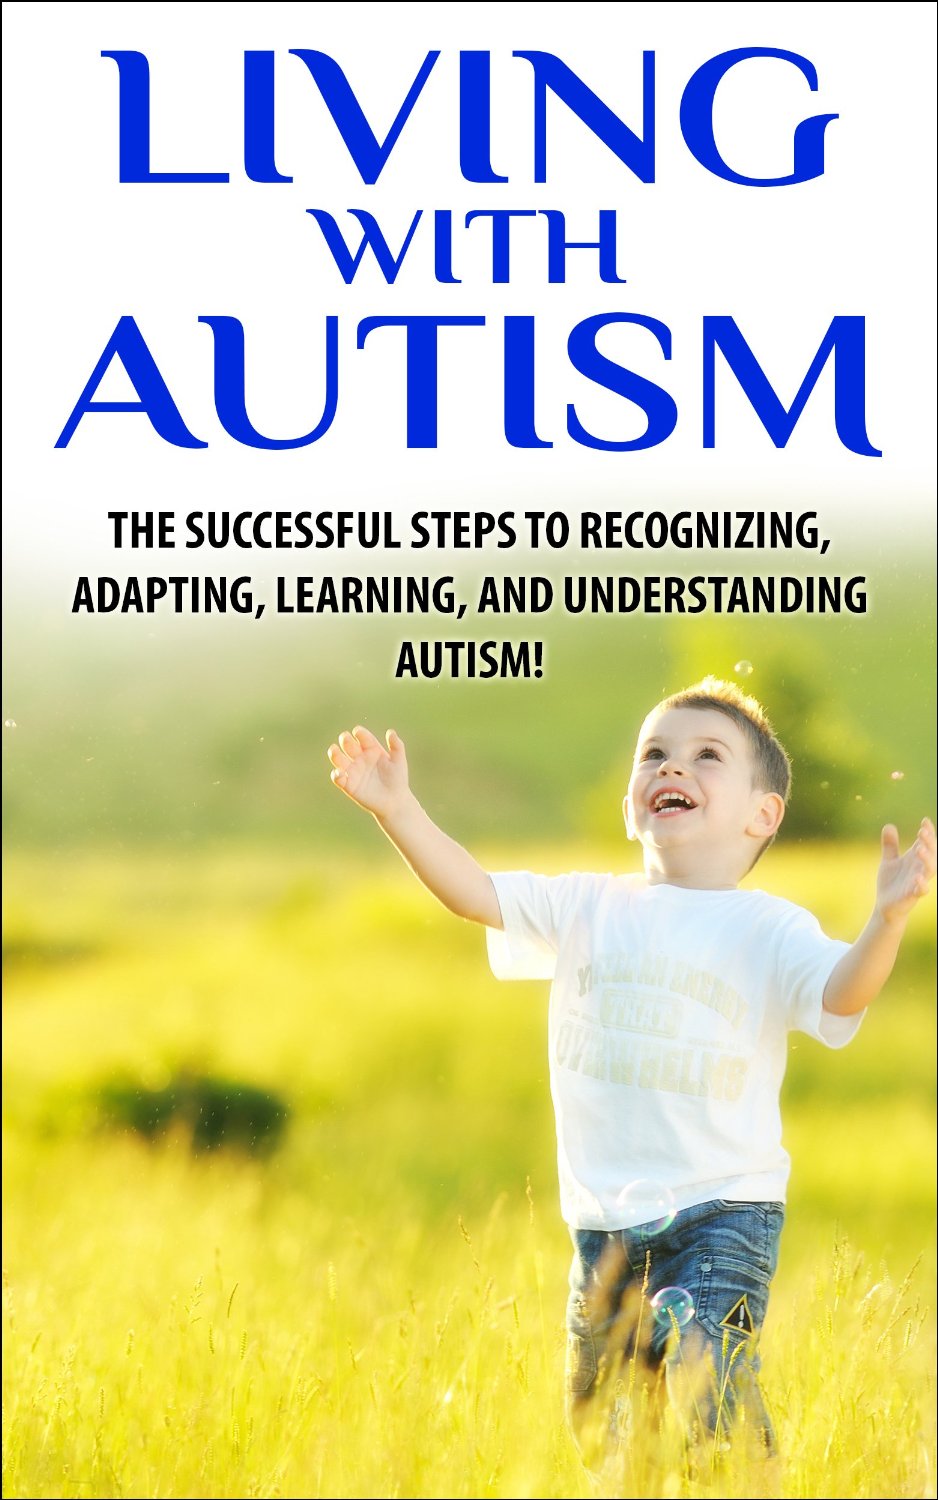 Living with Autism by Jeffrey Powell